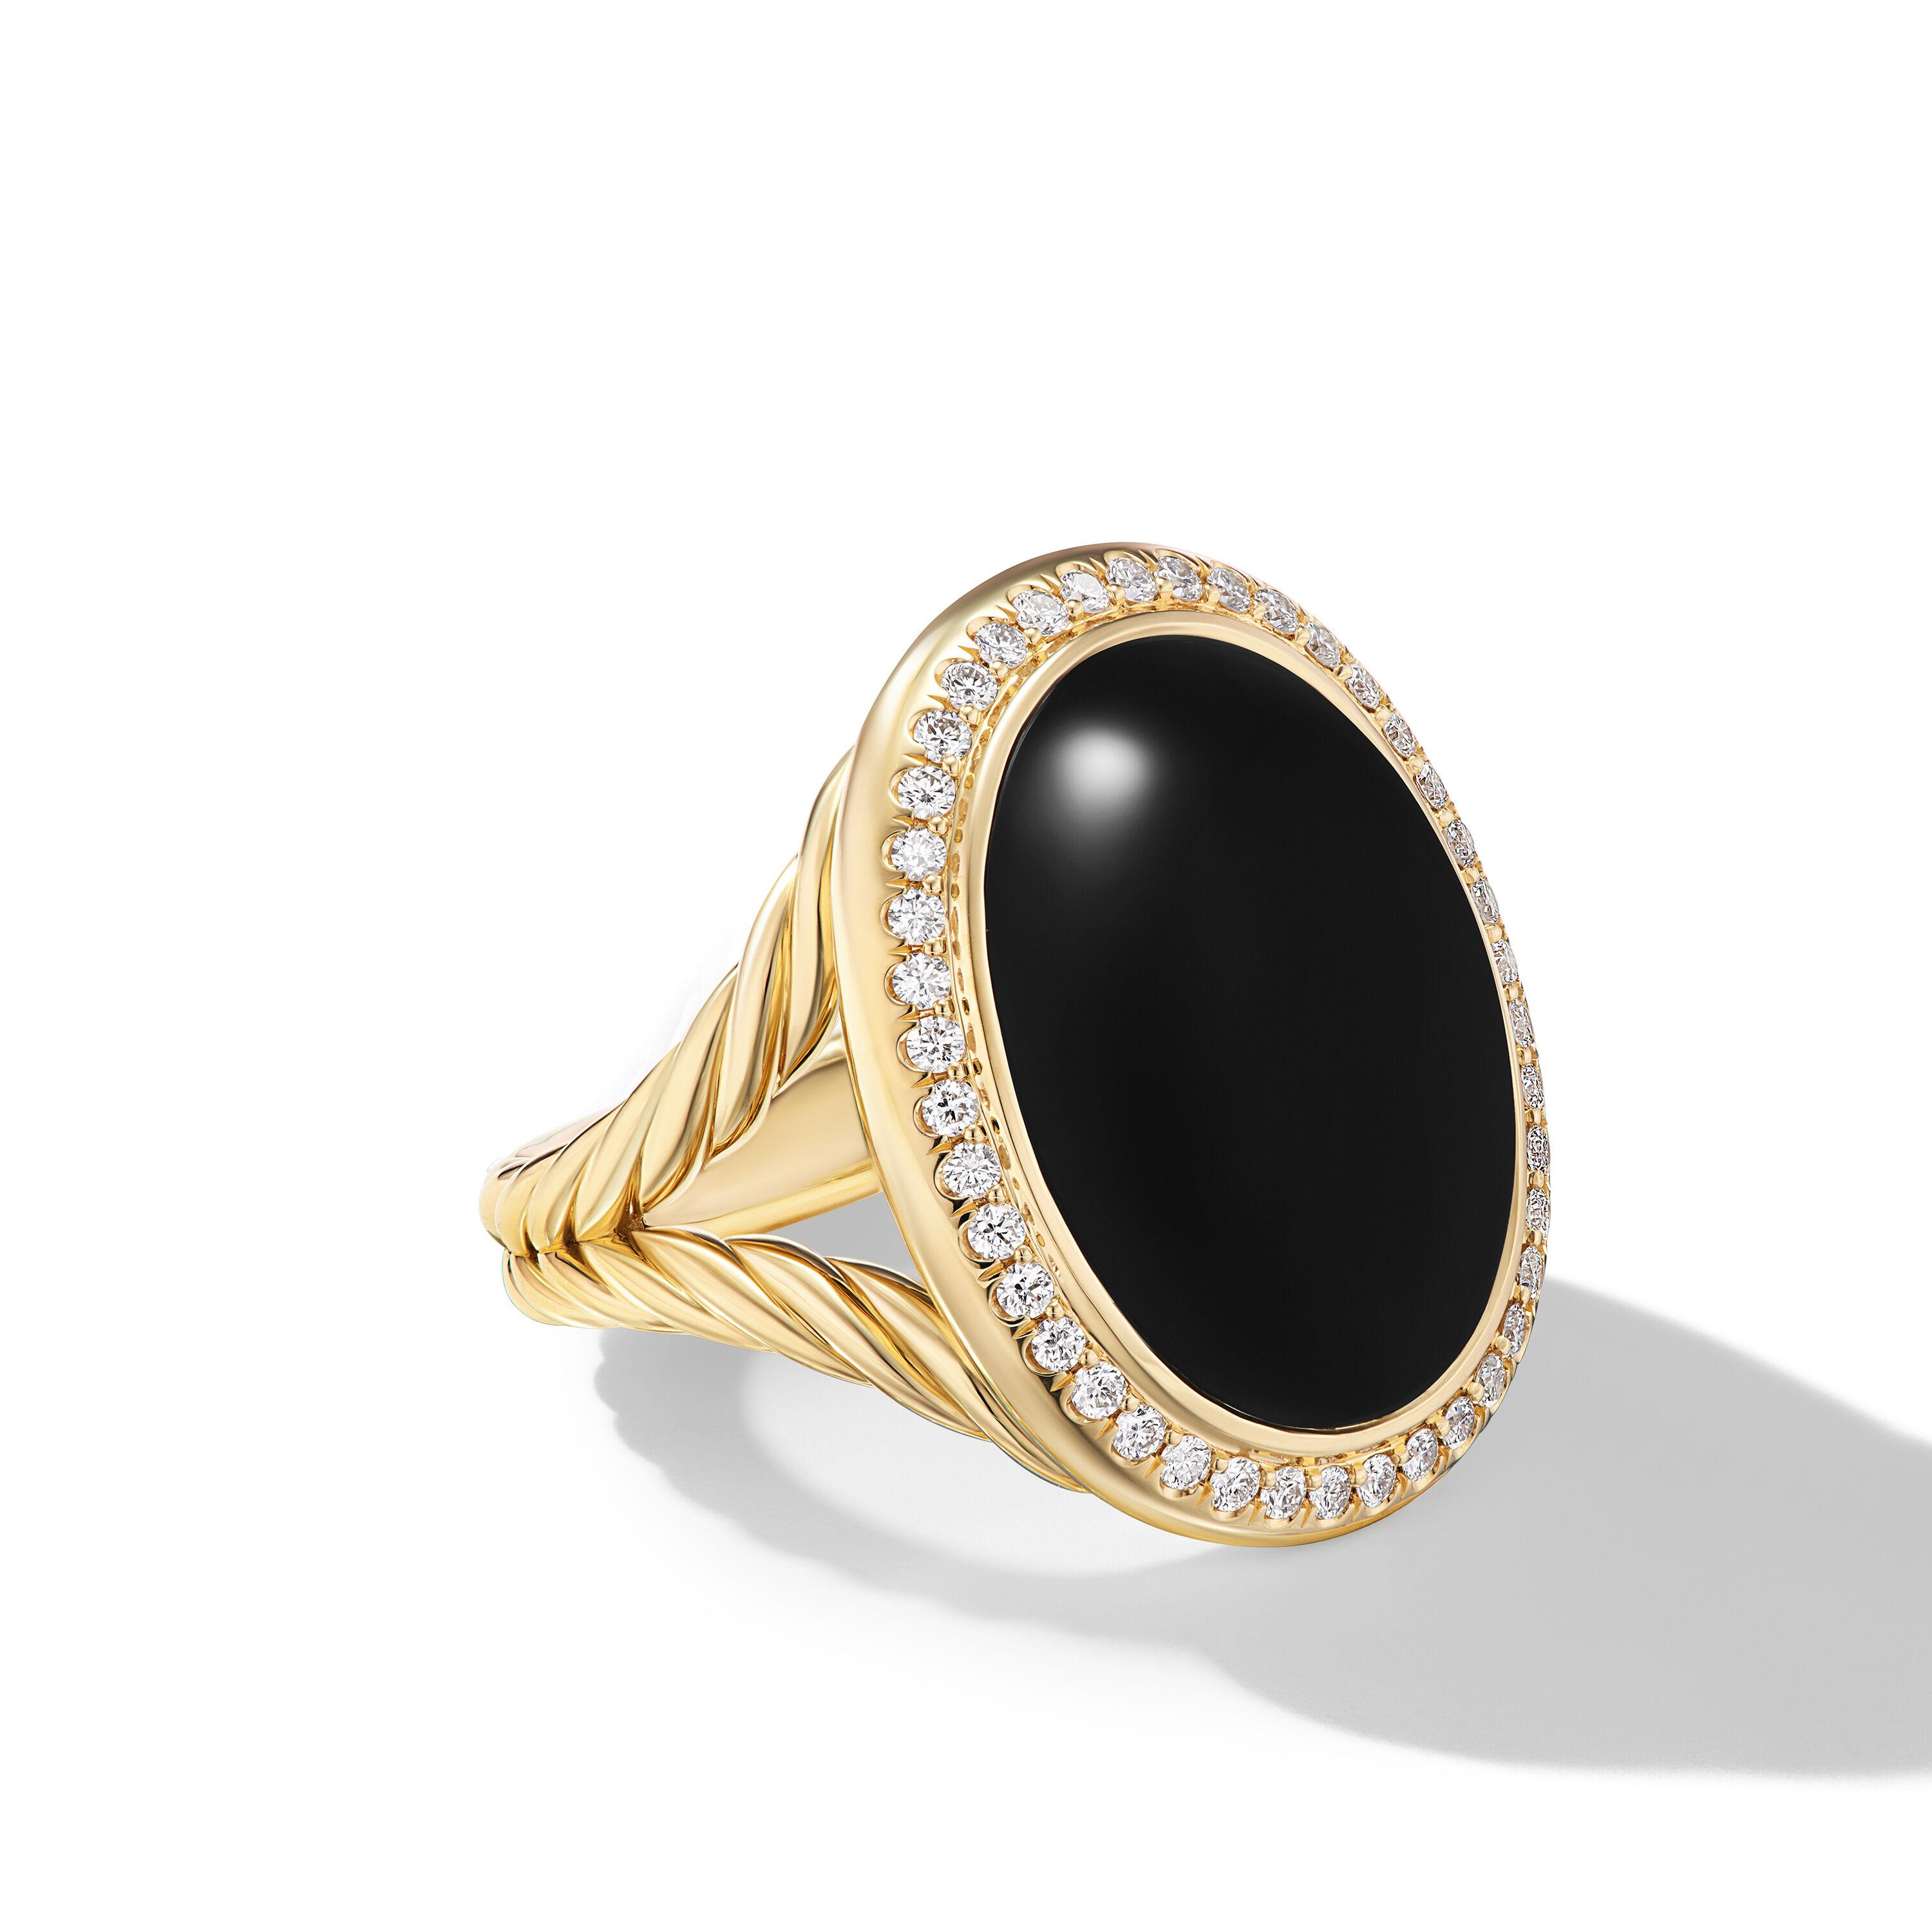 David Yurman Albion Oval Ring in 18K Yellow Gold with Black Onyx and Diamonds 0